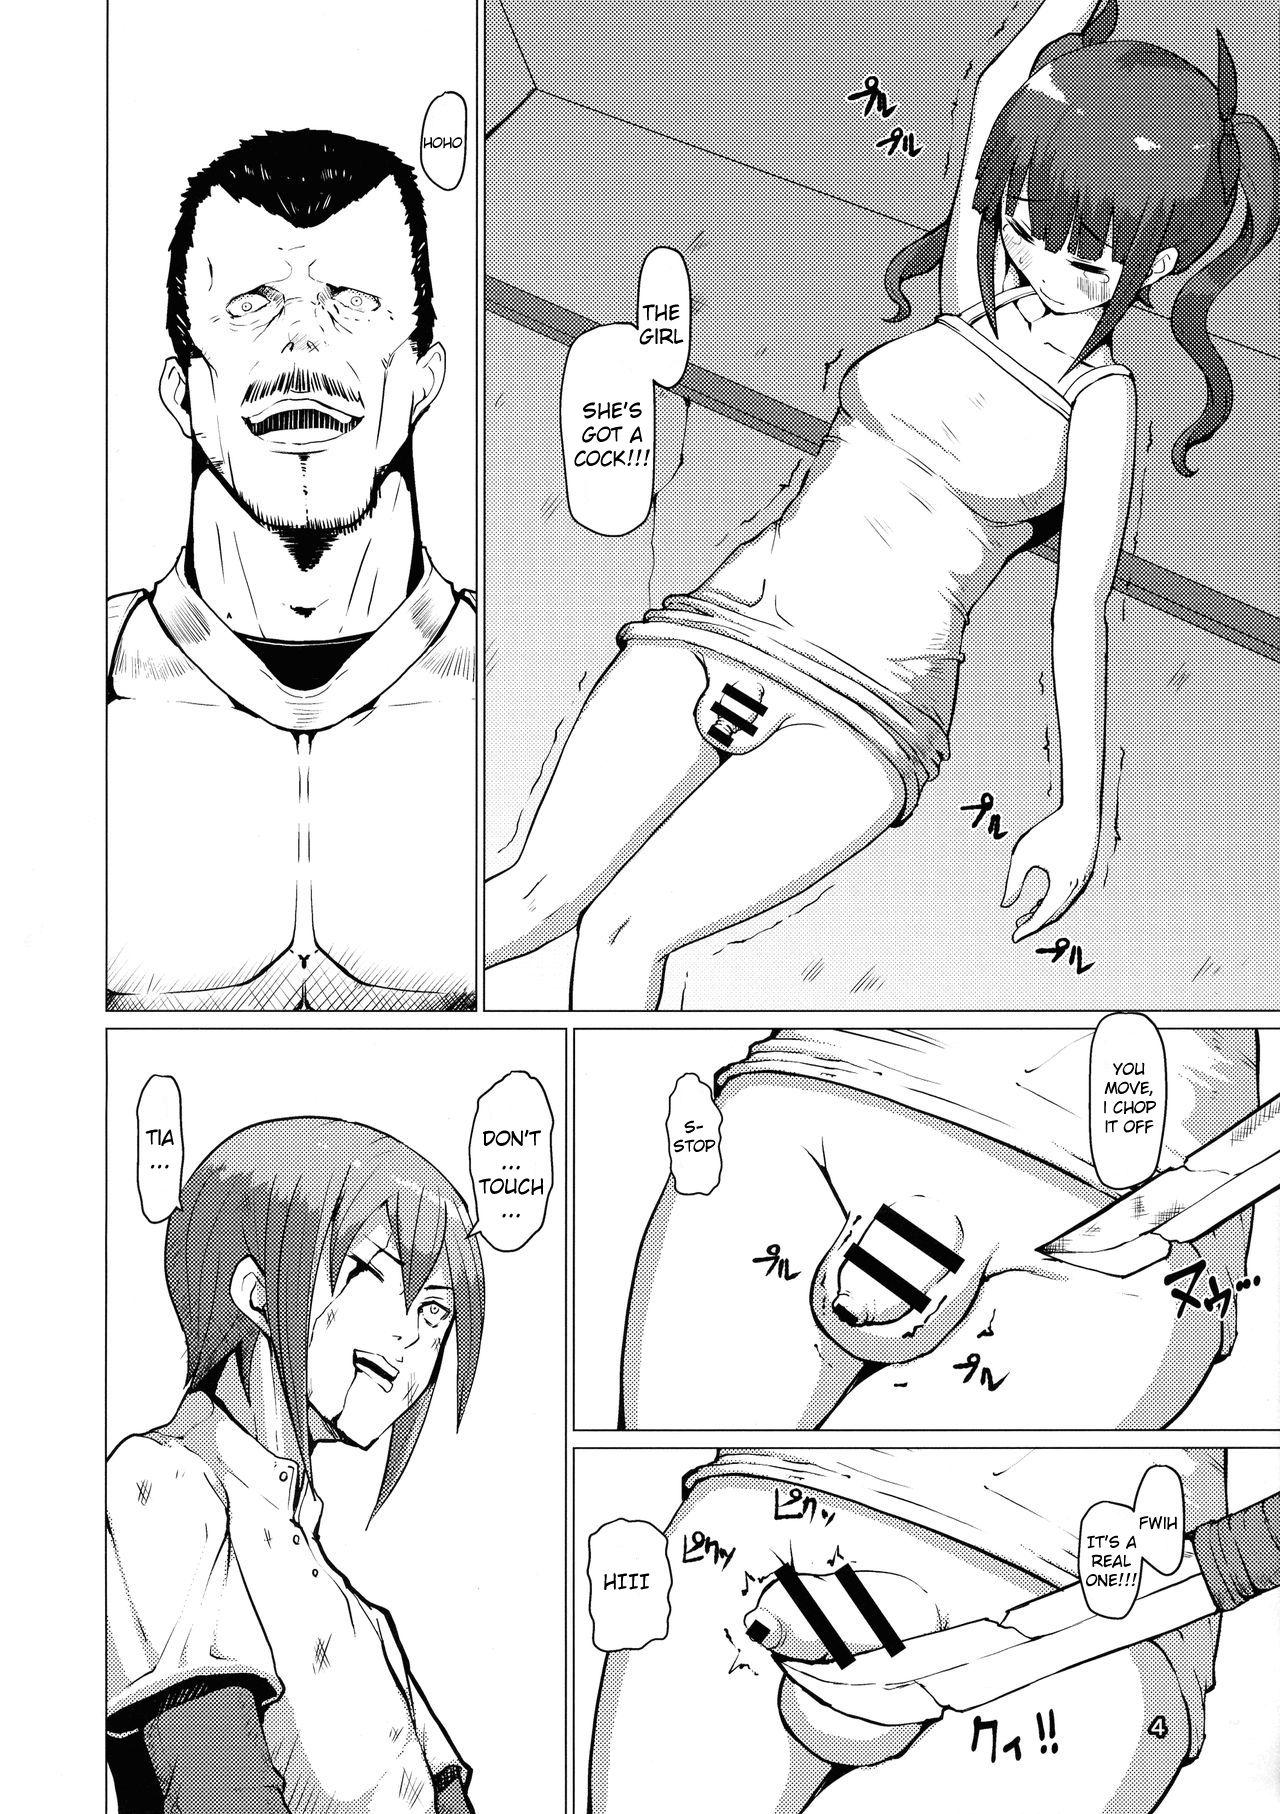 Best Makon 2 - Original Old Vs Young - Page 3